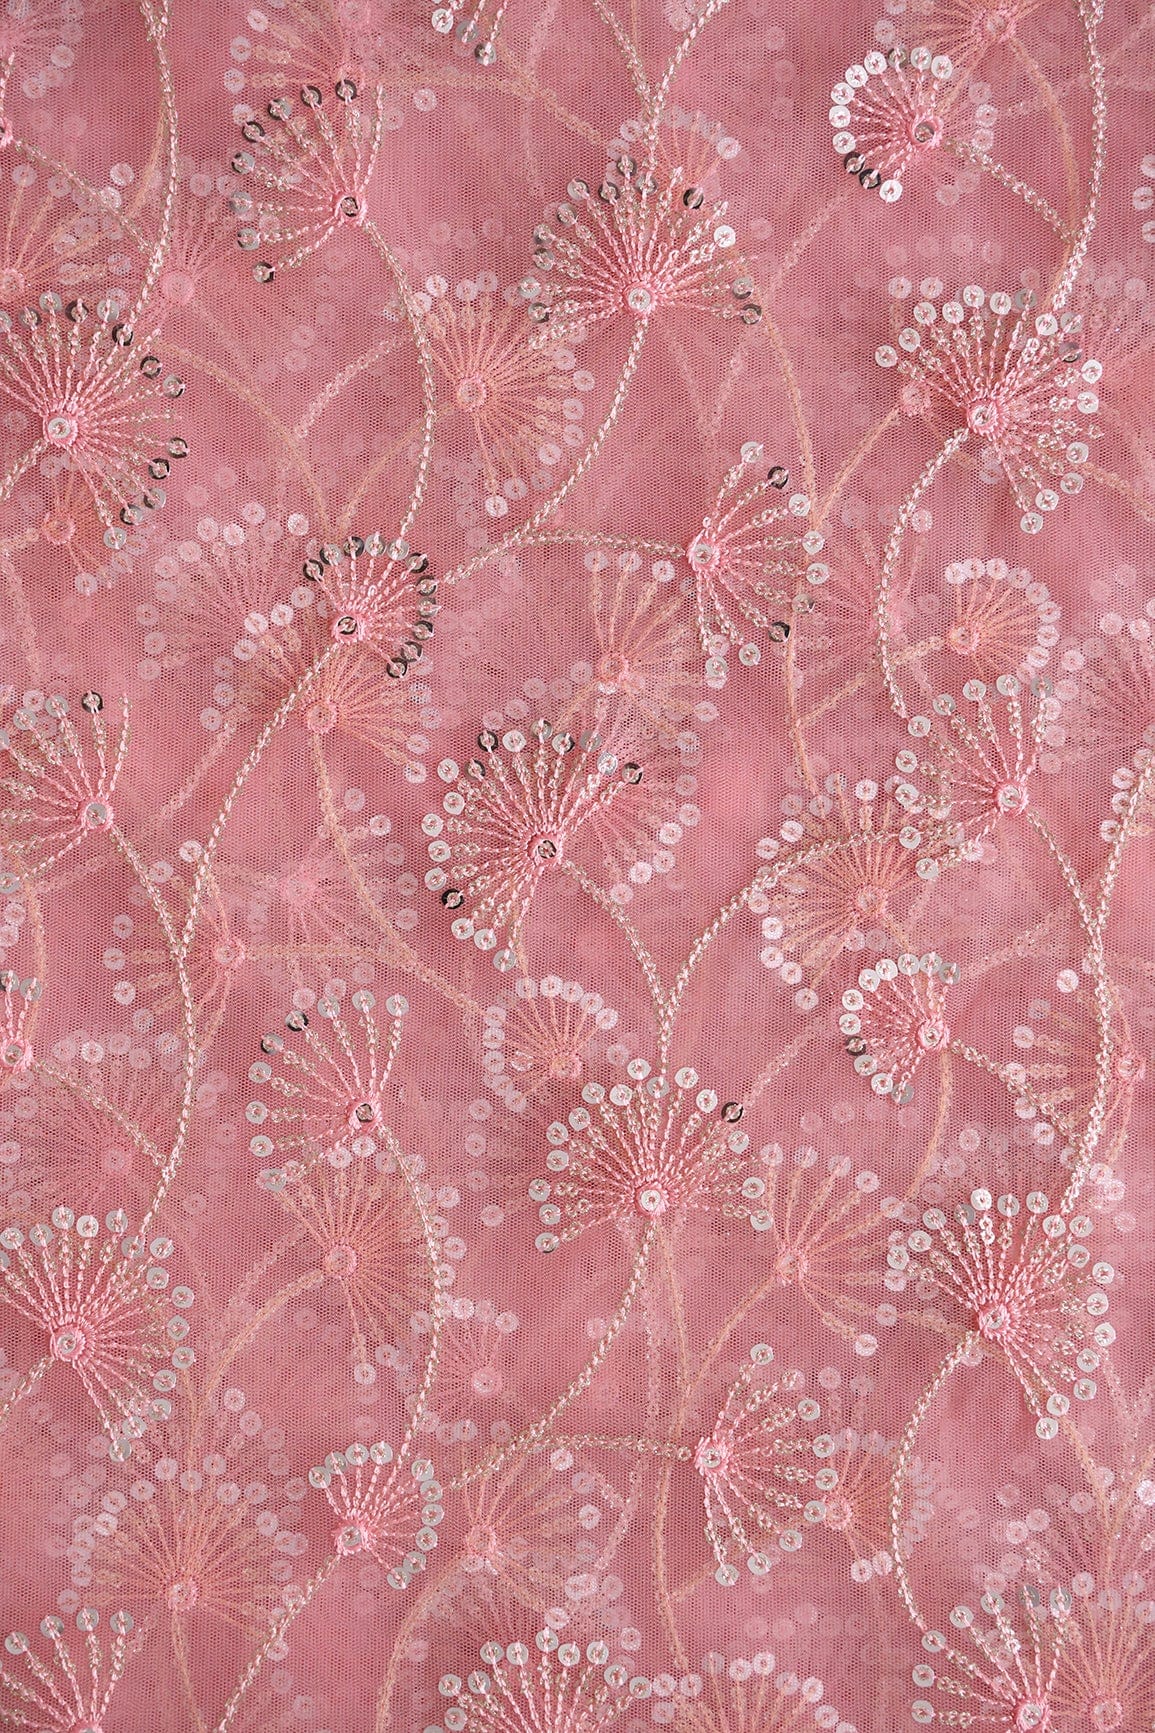 doeraa Embroidery Fabrics Pink Thread With Gold And Silver Sequins Floral Embroidery On Pink Soft Net Fabric